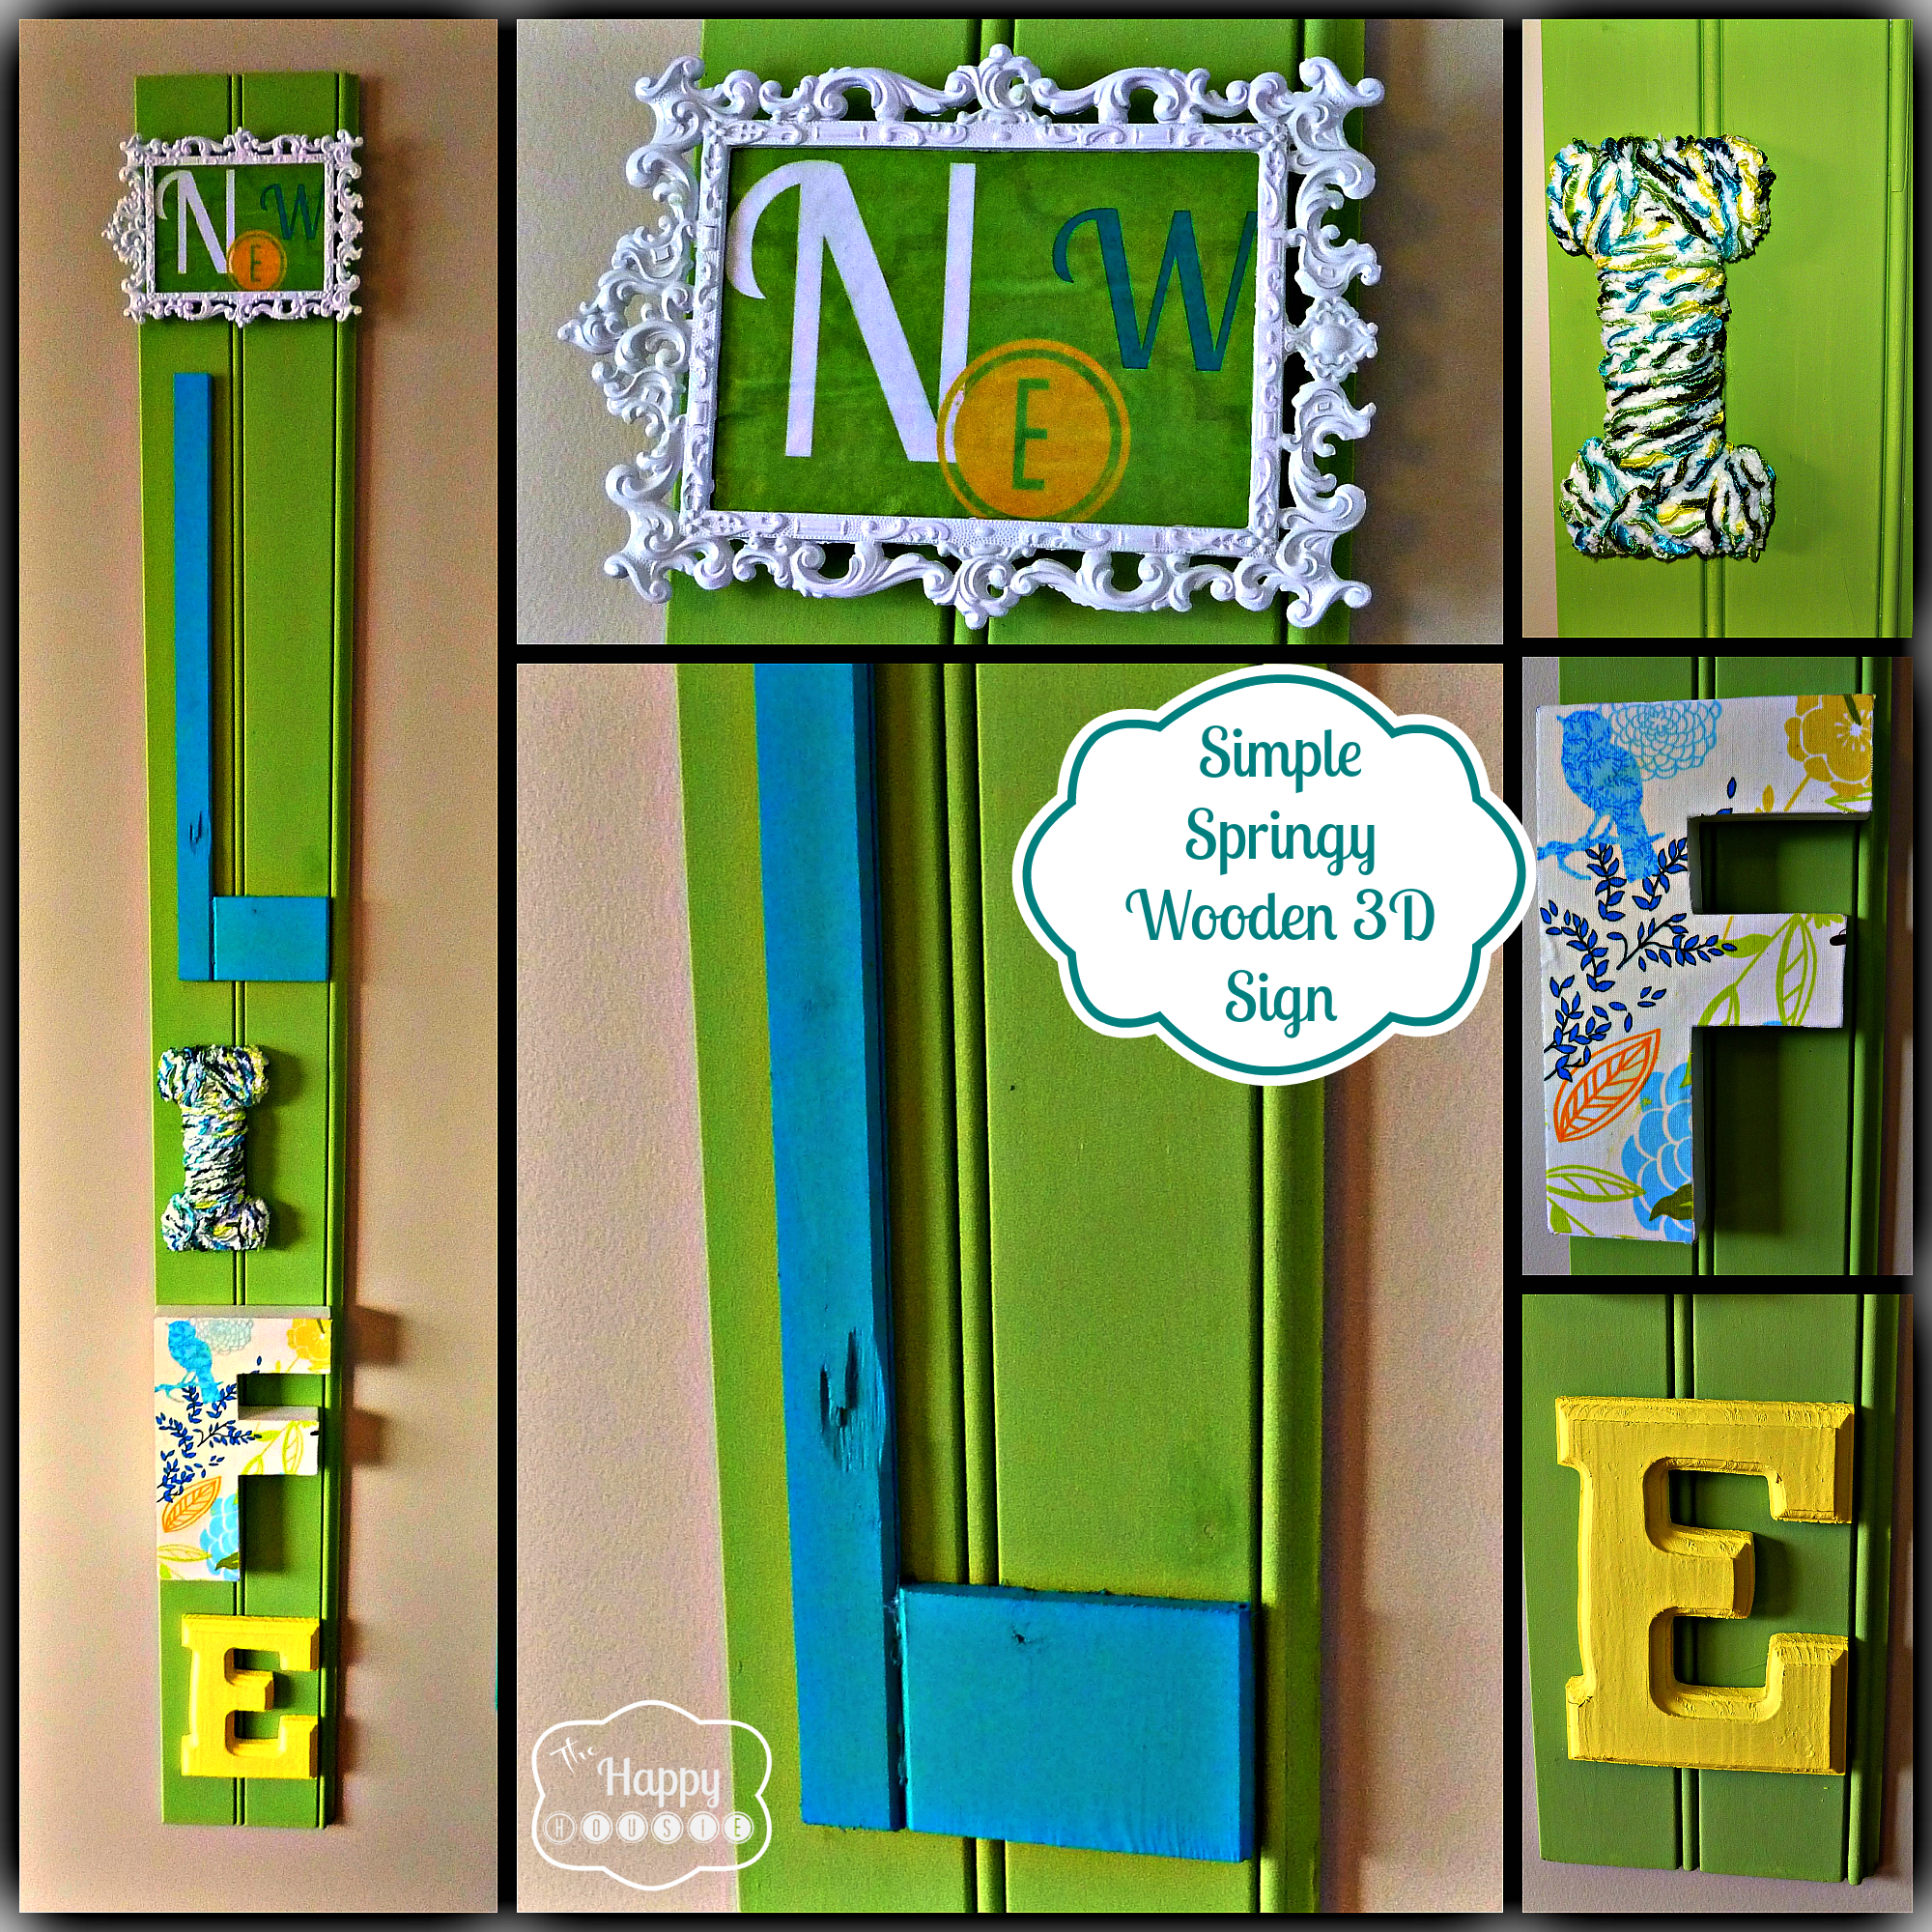 4F Craftin’: Spring’s New Life – A Simple 3-D Wooden Sign